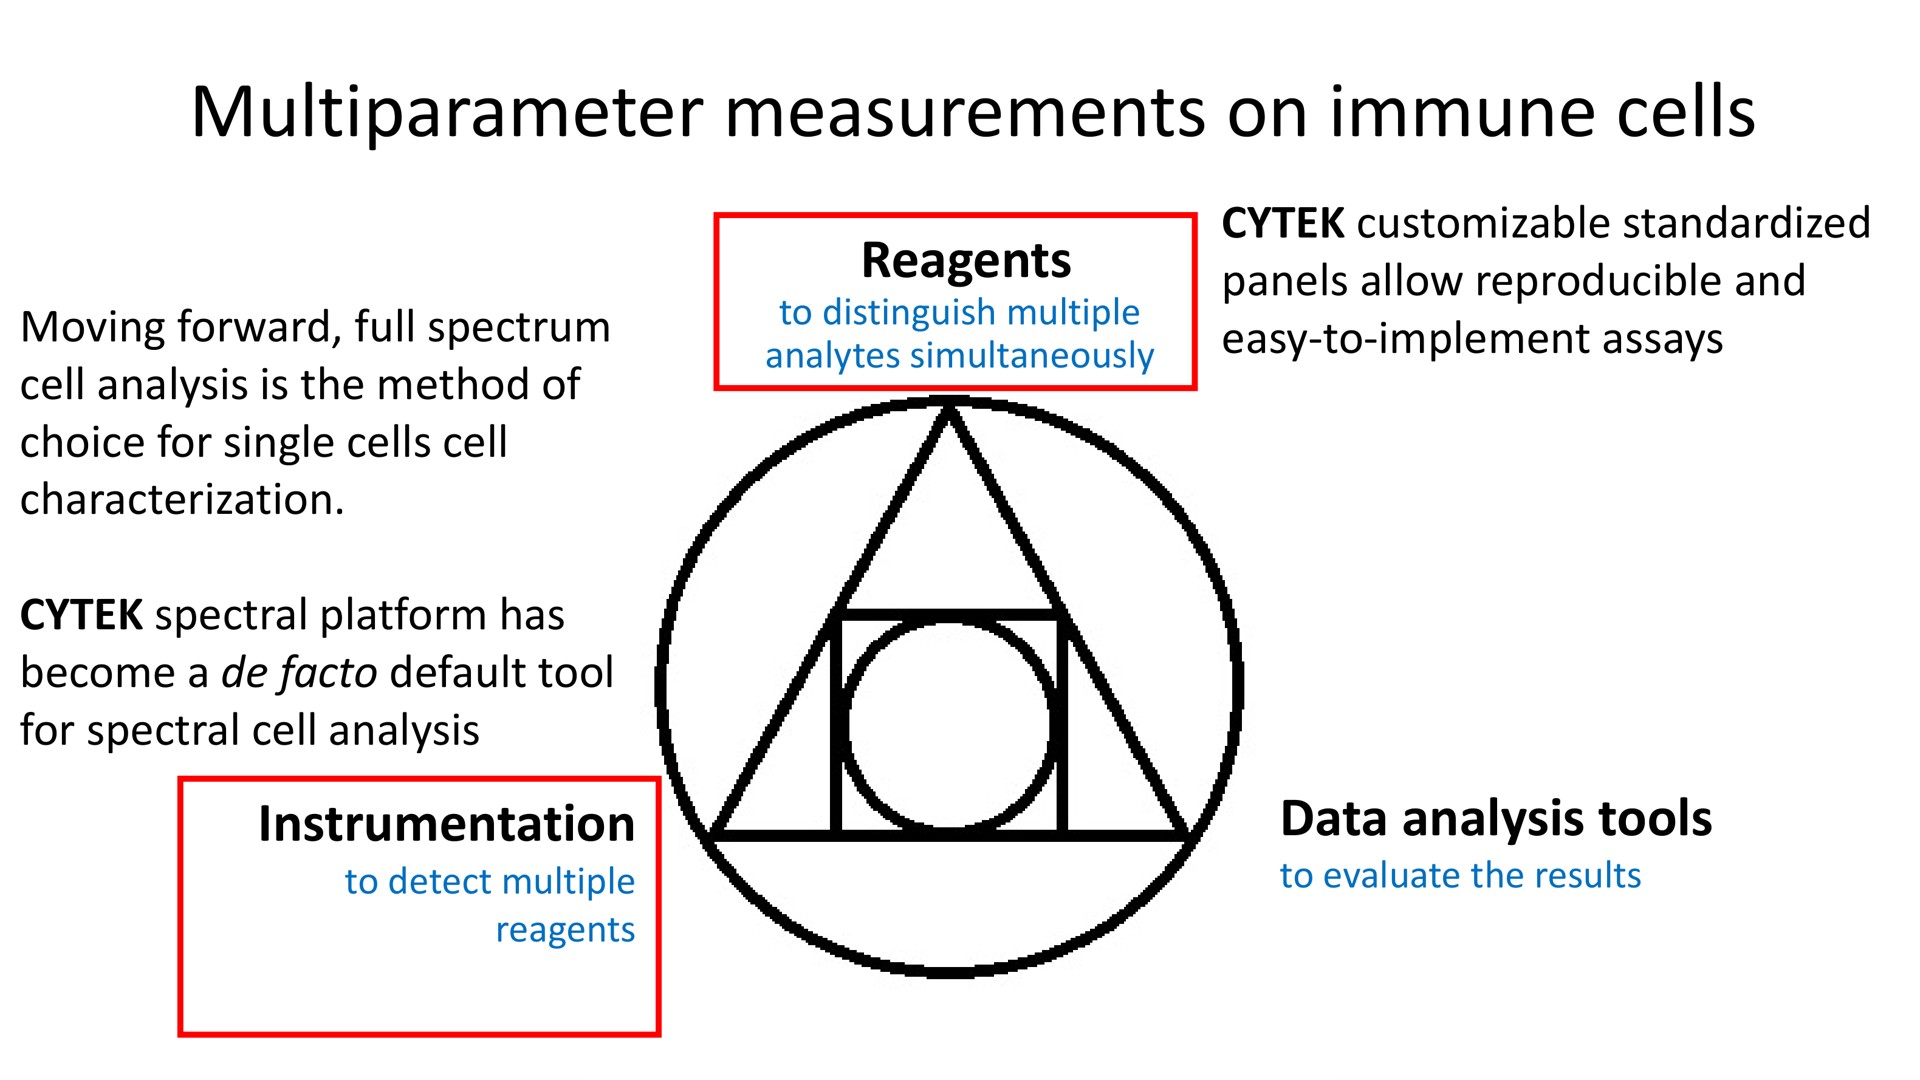 measurements on immune cells instrumentation reagents data analysis tools easy to implement assays | Cytek